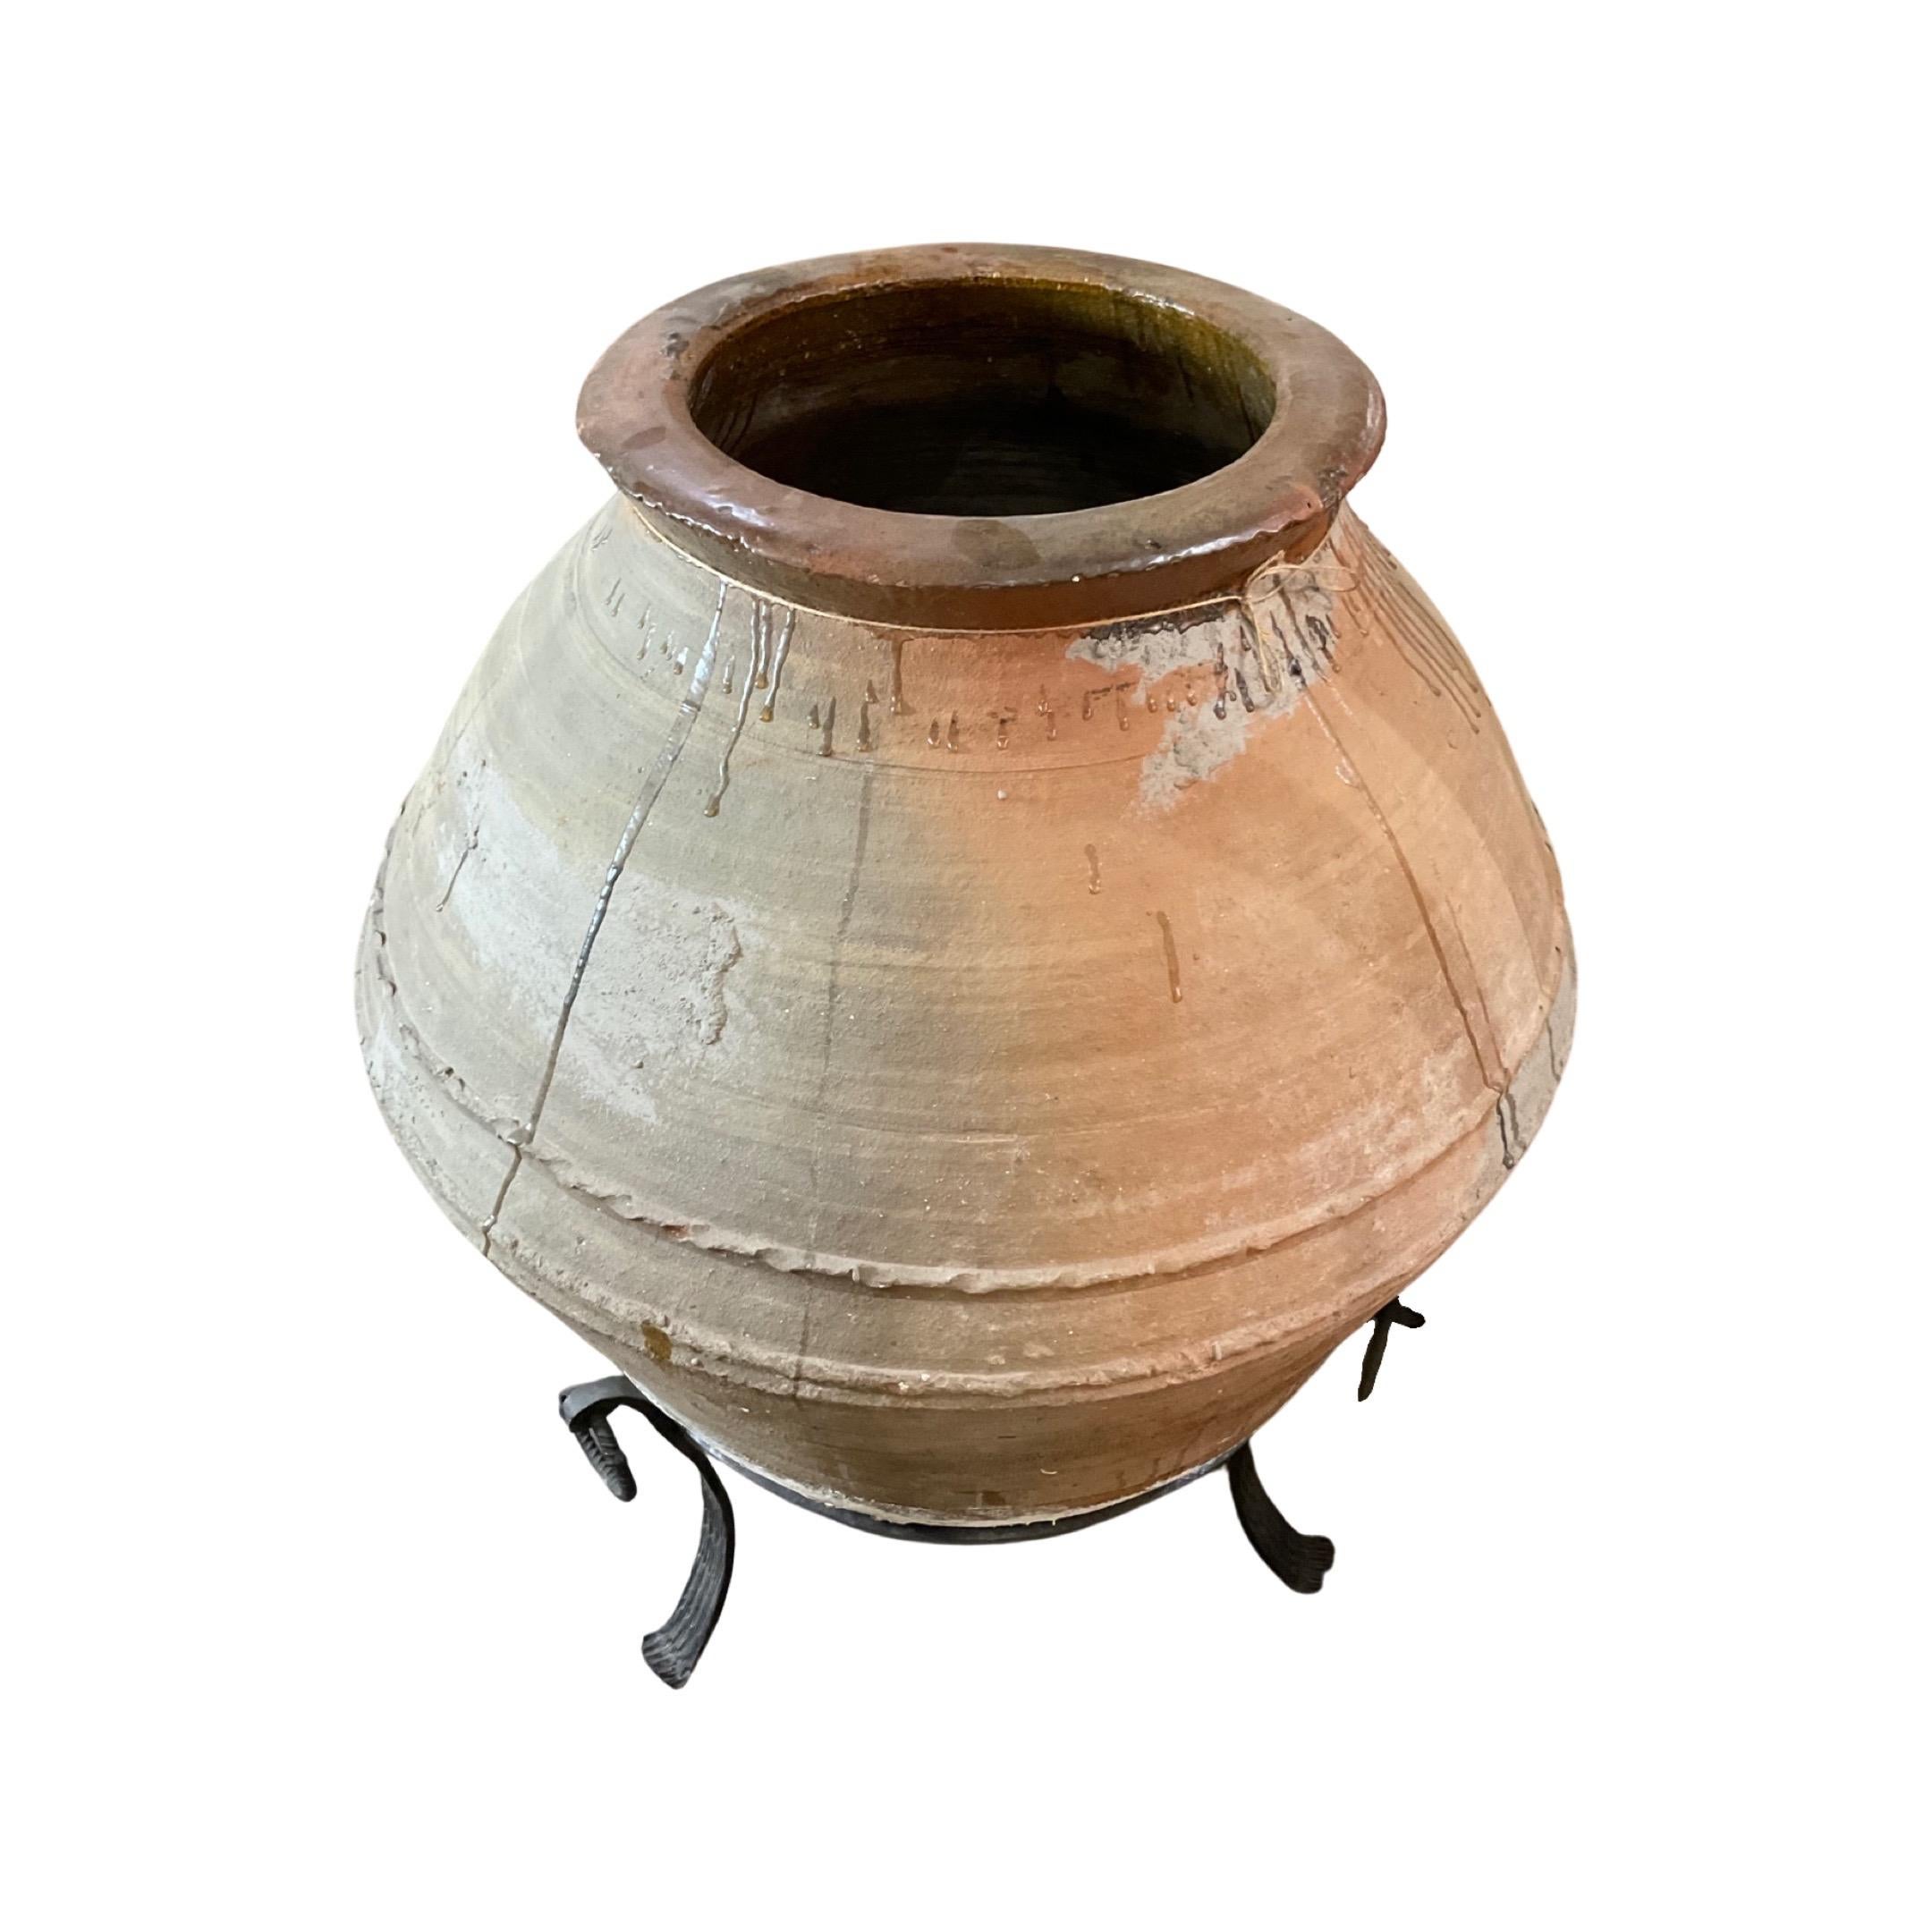 This traditional terracotta planter from Greece has been crafted from natural clay and fired at high temperatures, resulting in a durable, frost-resistant design that can withstand outdoor conditions for many years. Its 18th century origins make it